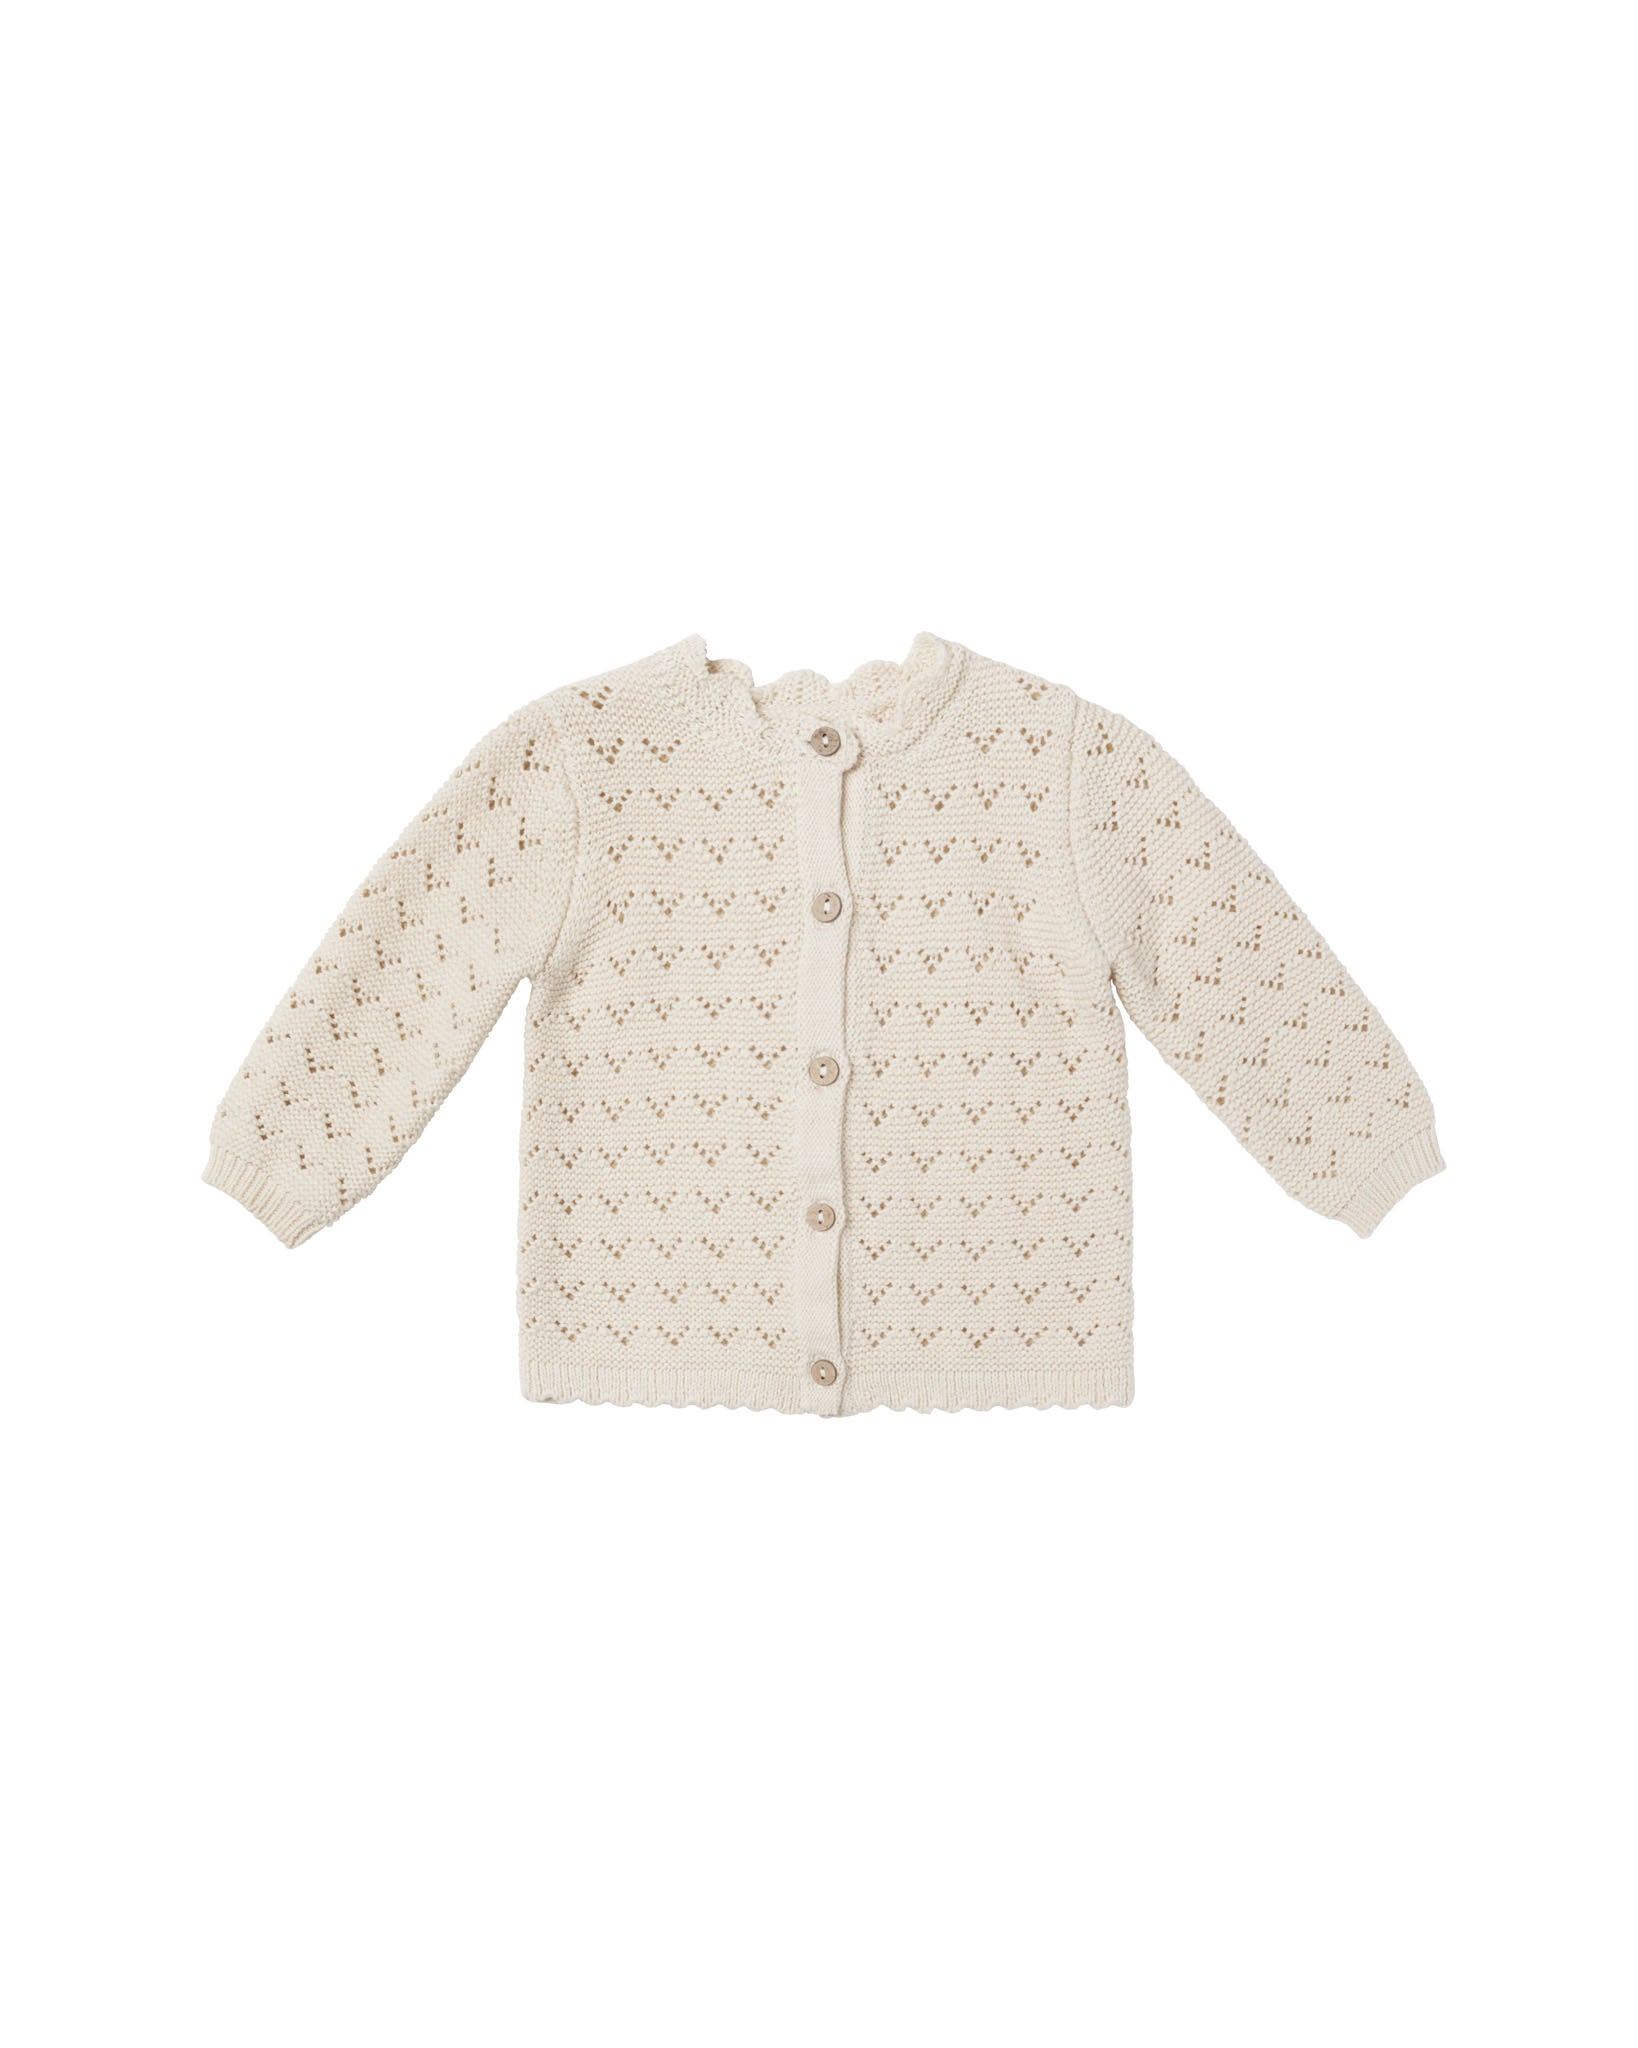 Natural Knit Cardigan & Bloomer Set - Twinkle Twinkle Little One